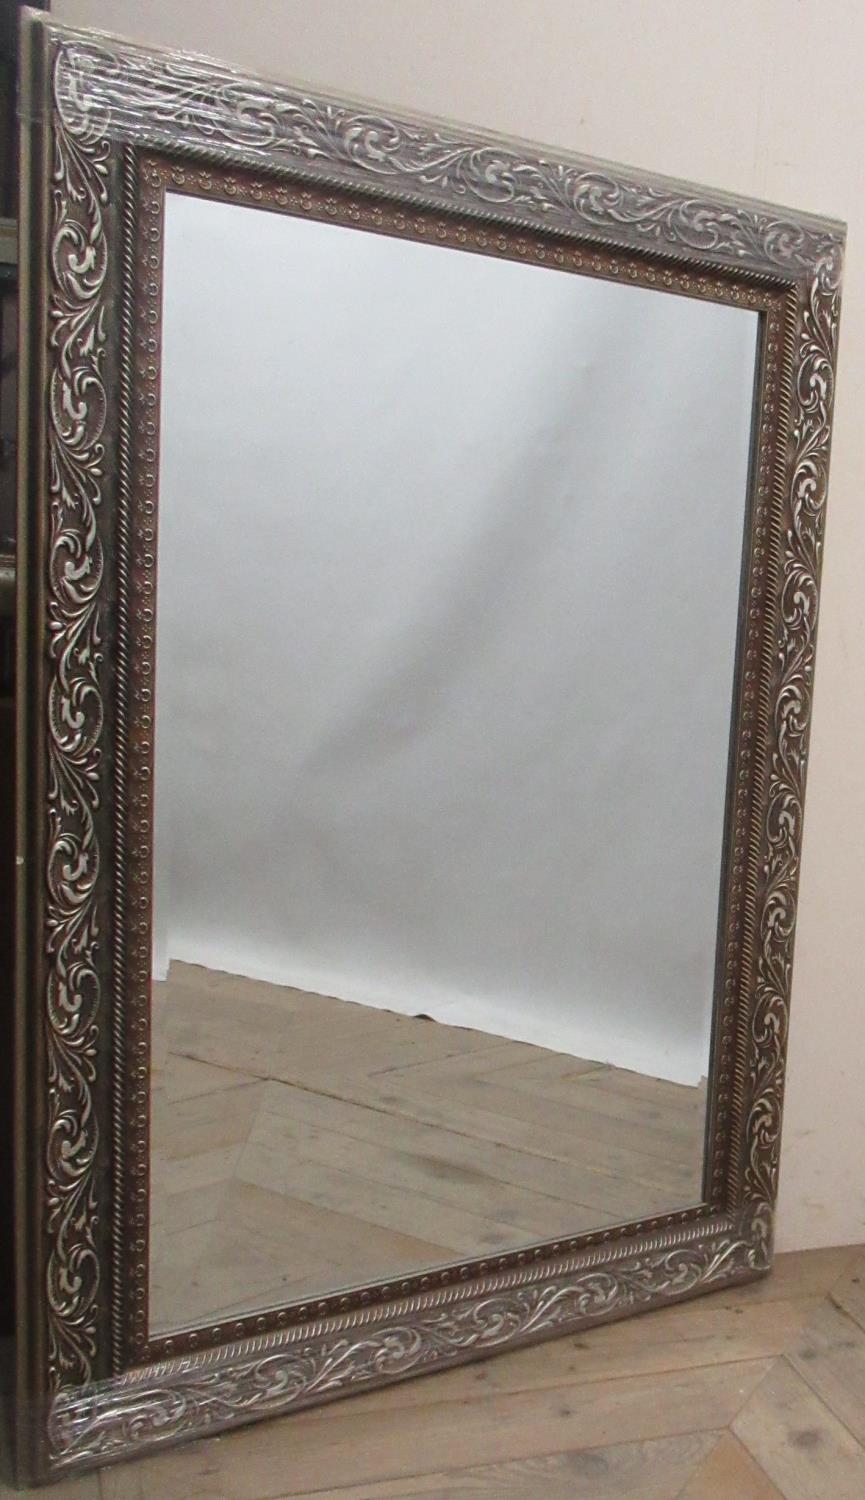 Victorian style wall mirror in Champagne scroll moulded frame, 103cm x 74cm